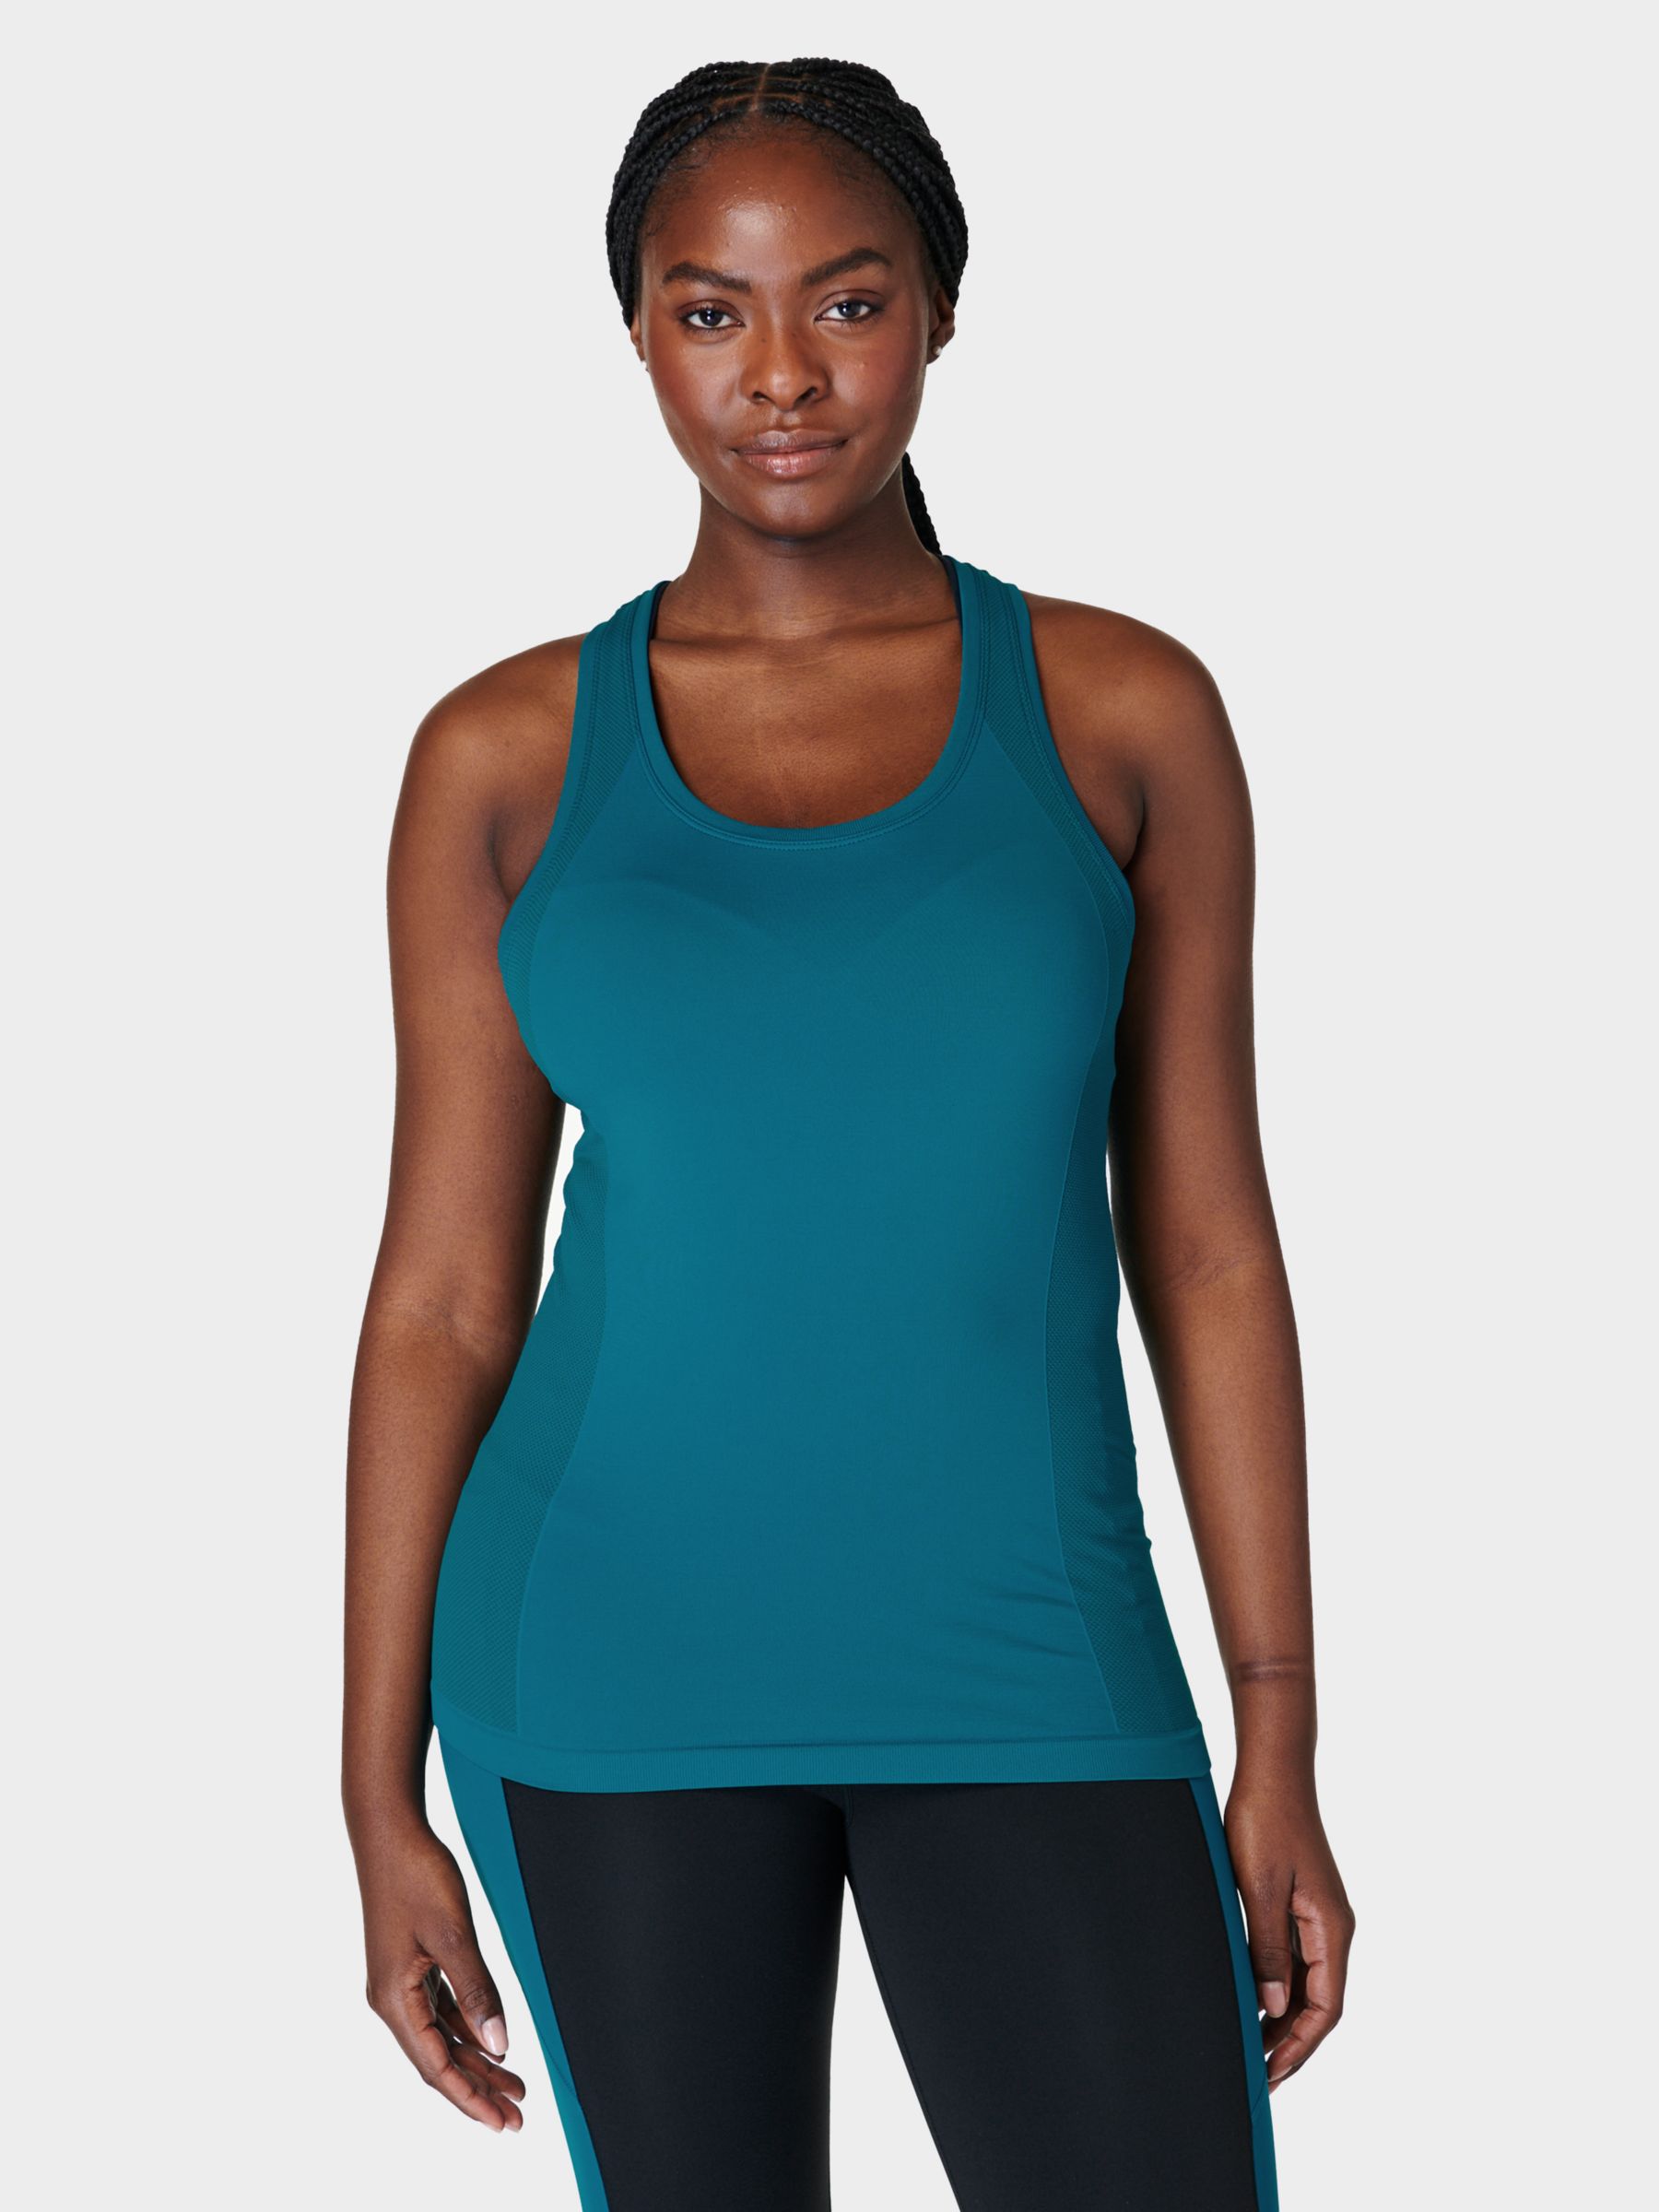 Slim Factor by Investments Lexi Scoop Neck Sleeveless Tank Top